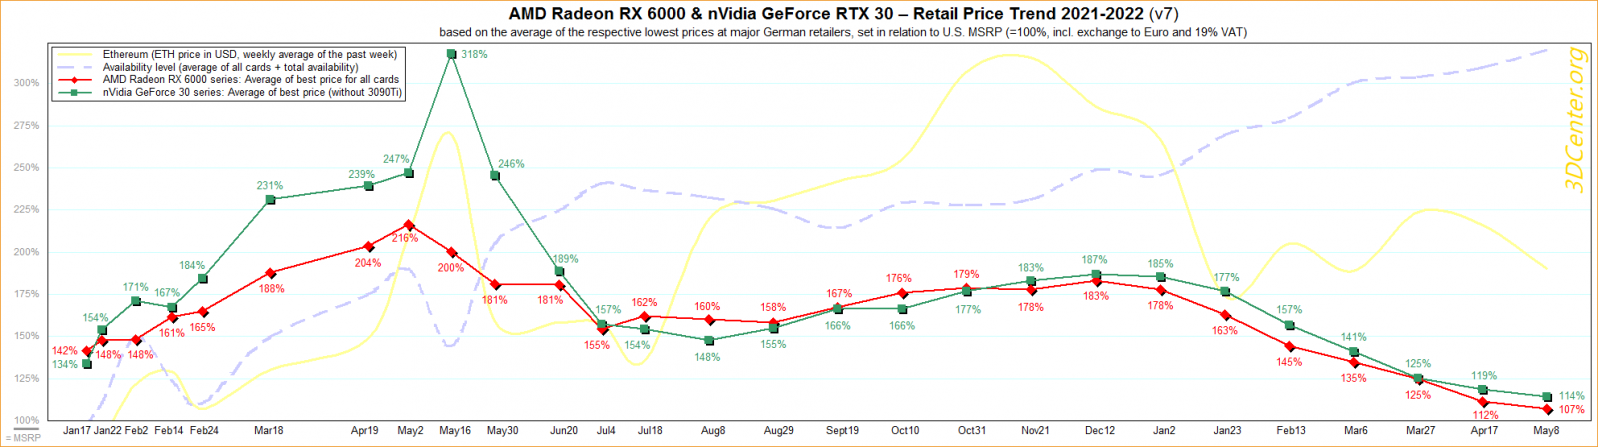 AMD-nVidia-Retail-Price-Trend-2021-2022-v7.png